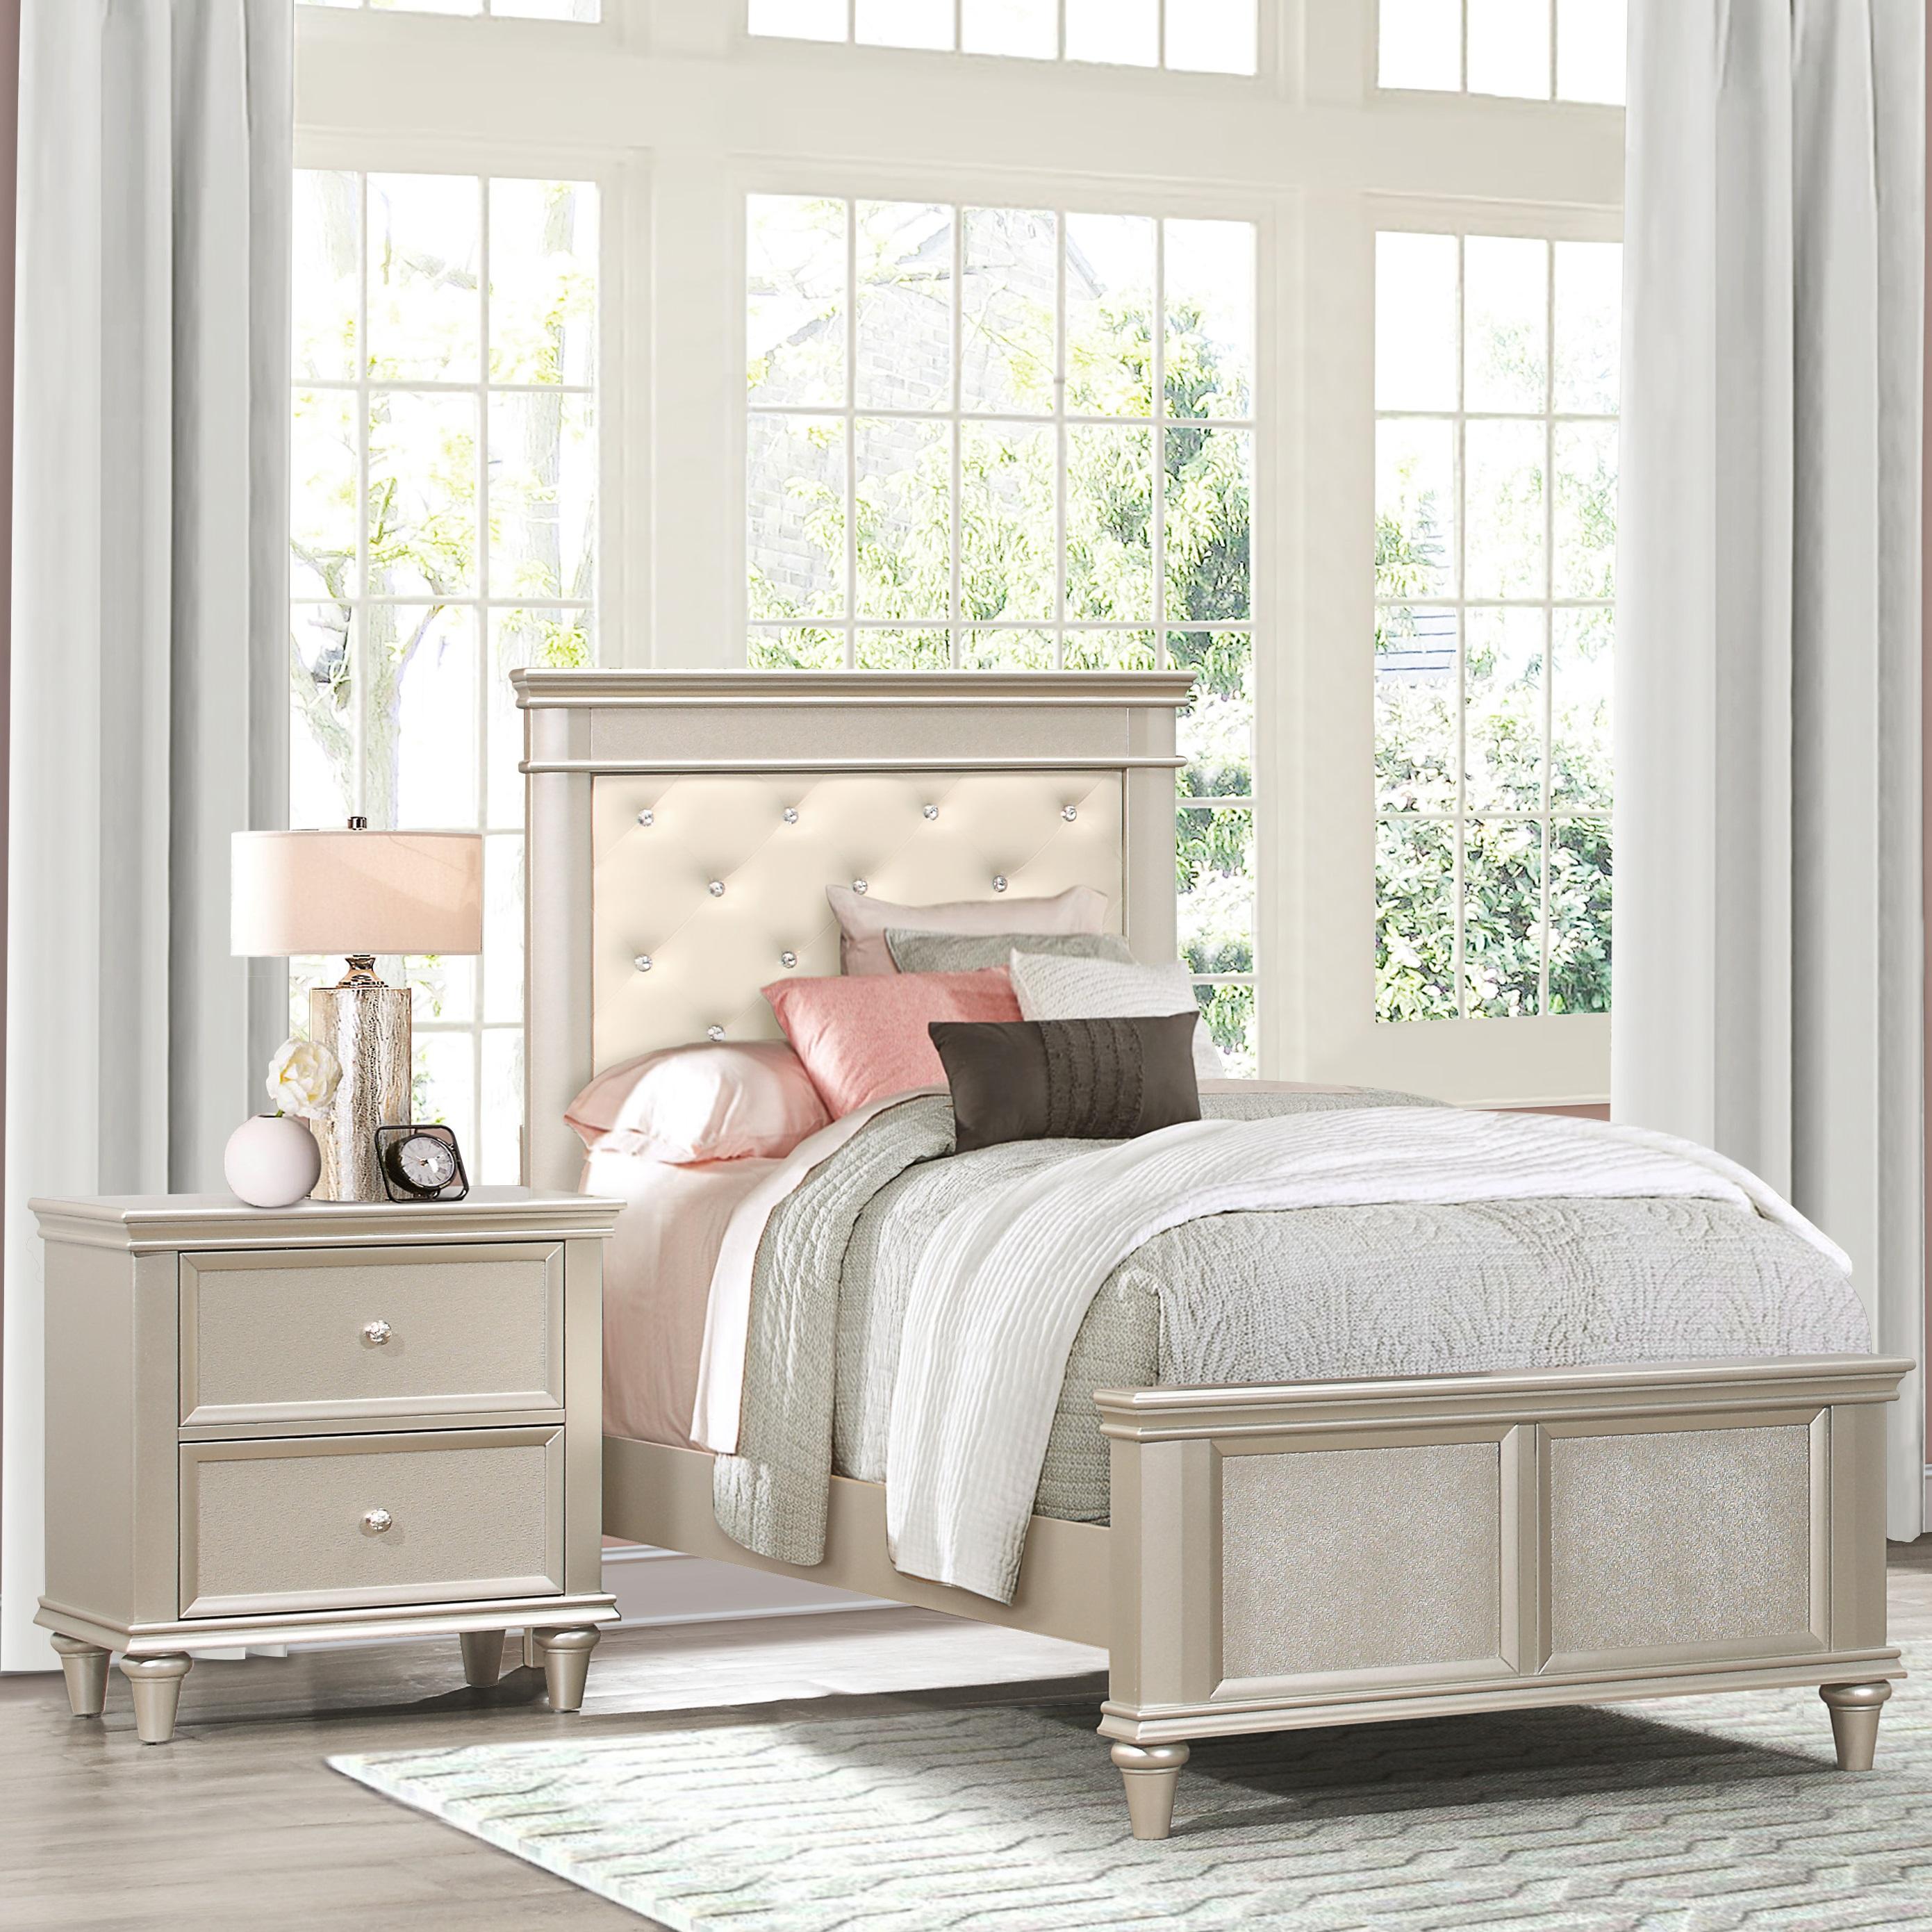 Traditional Bedroom Set 1928T-1-3PC Celandine 1928T-1-3PC in Off-White, Silver Faux Leather